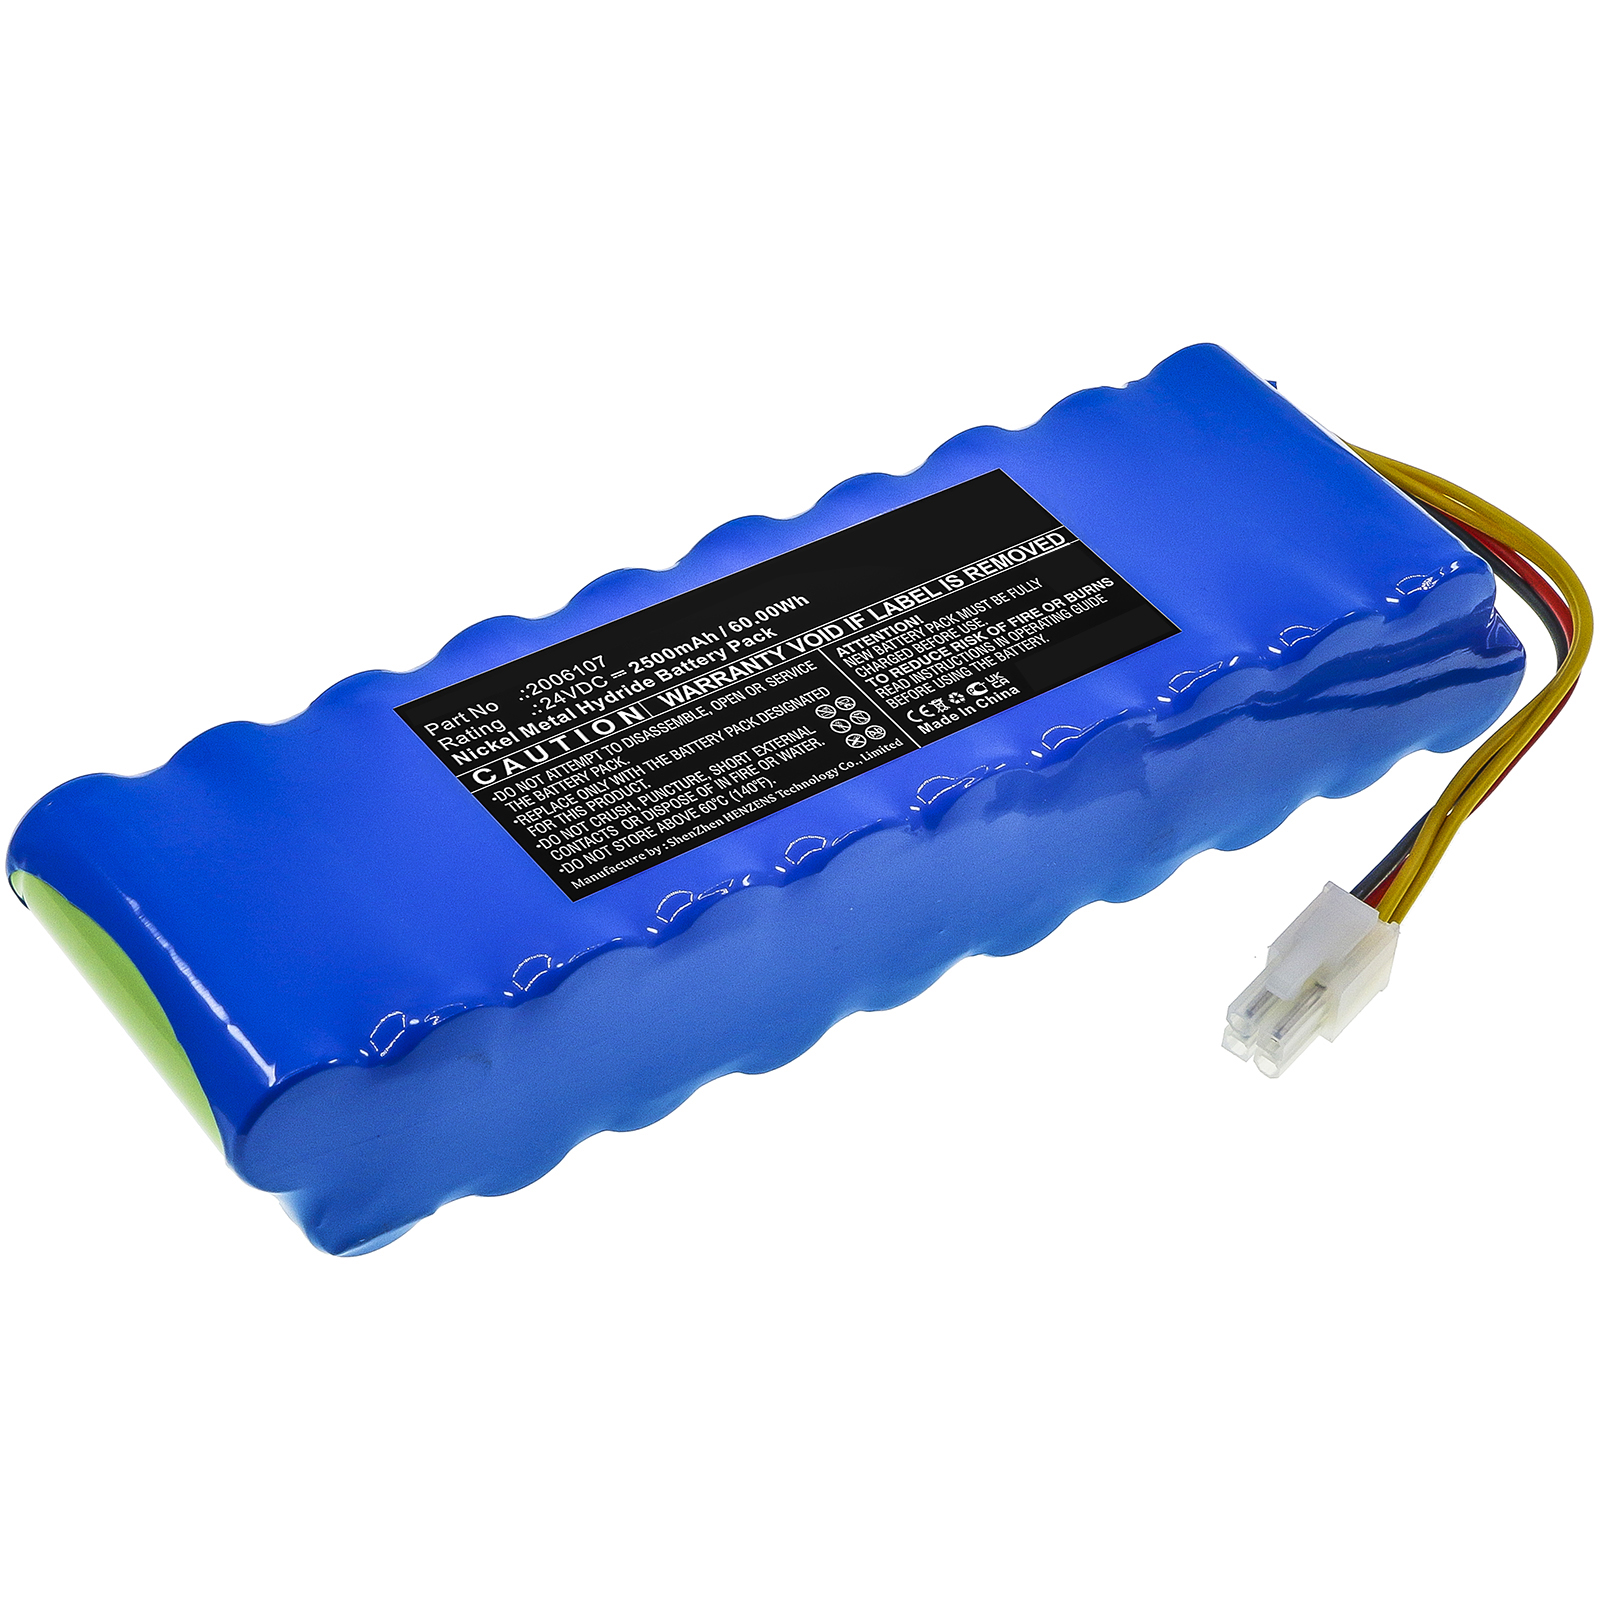 Synergy Digital Medical Battery, Compatible with HillRom 2006107 Medical Battery (Ni-MH, 24V, 2500mAh)